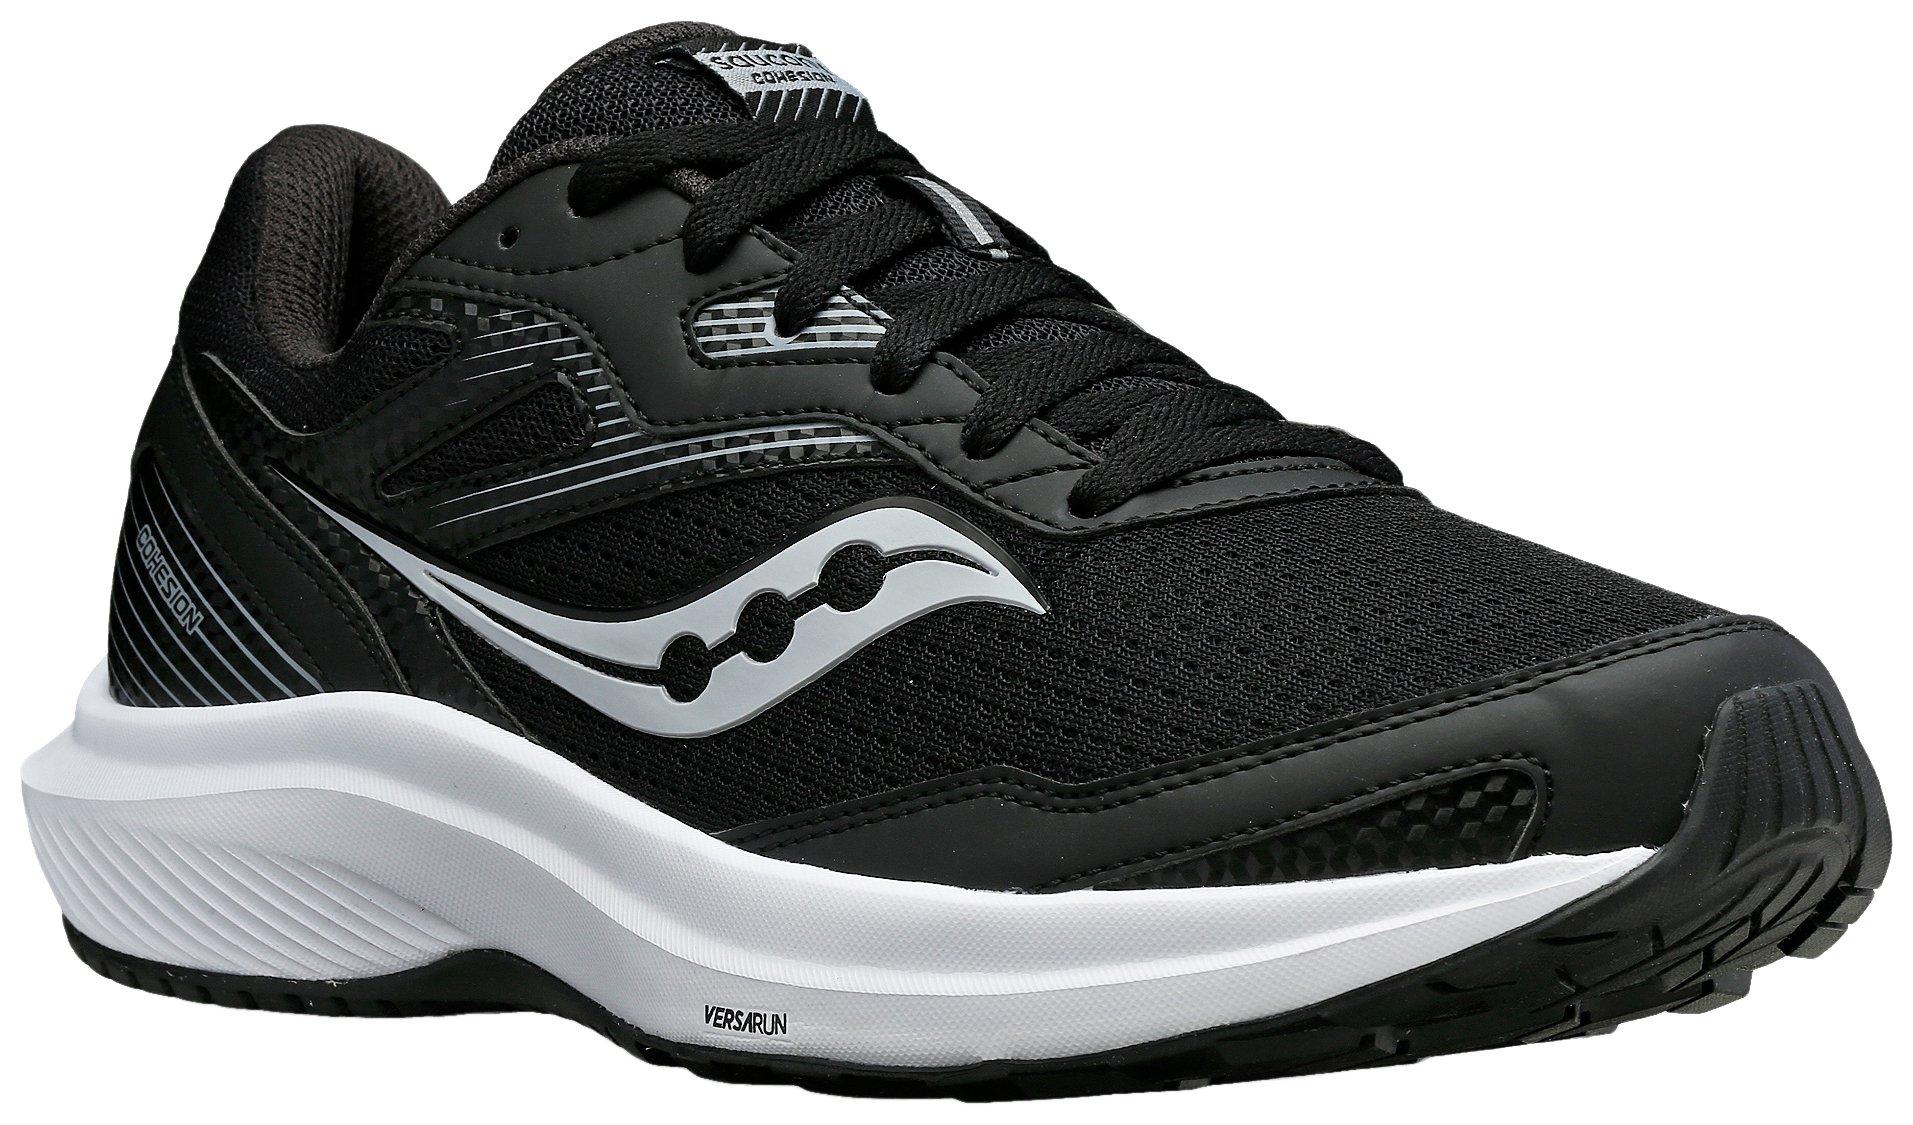 Saucony Mens Cohesion 16 Running Shoes